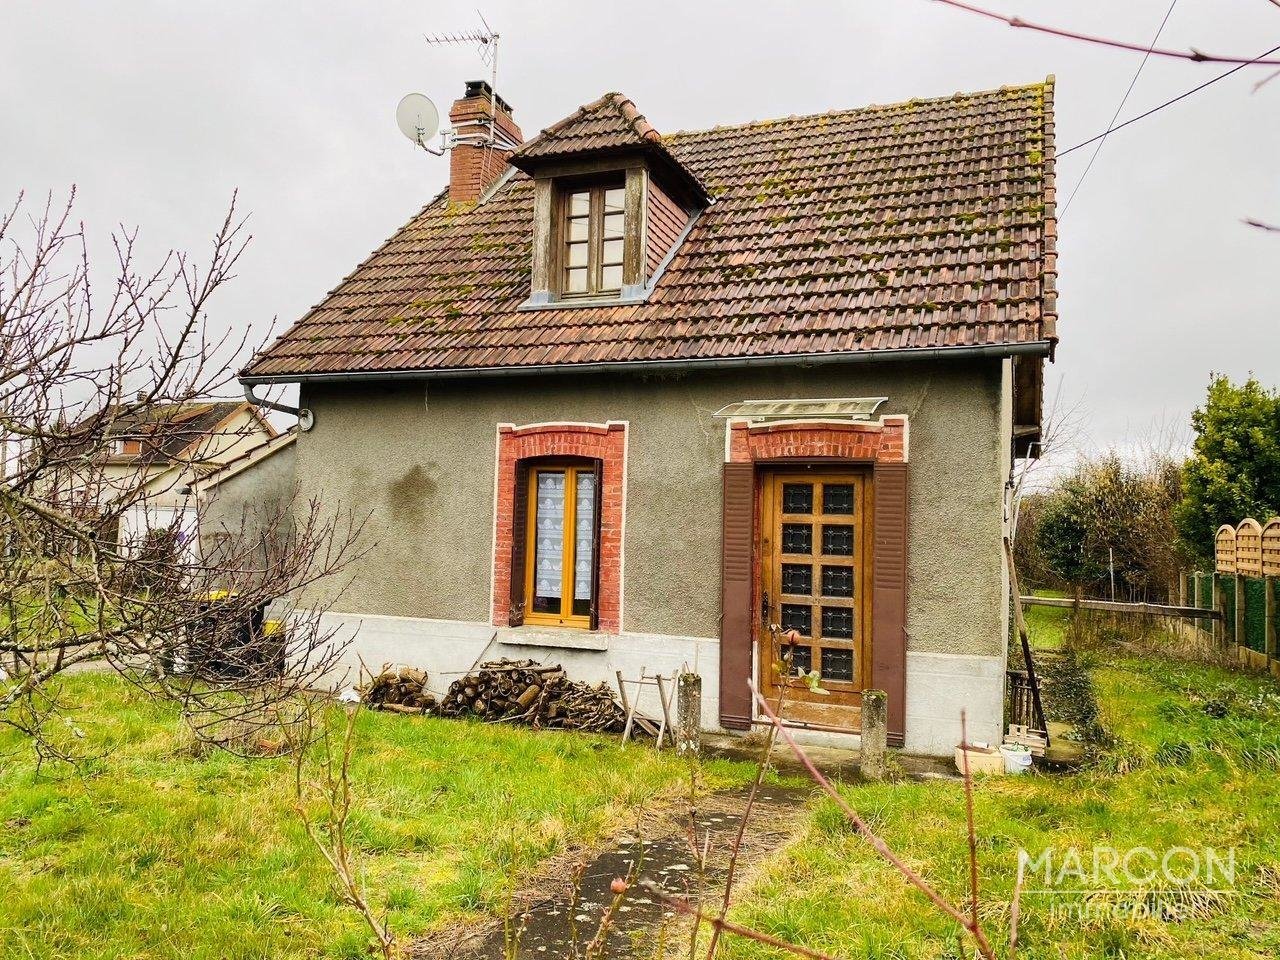 Property for Sale Up To €50k France #houseinfrance #renovering #fönsterluckor #house #fromage #francelovers #southoffrance #renovationproject #yum #shhh #maison #fromages #frenchfood #france #cheeselover #renoveringsprojekt #travelposter #livingfrance #fromagefrancais #frenchcountrylife #cuisine #castlefrance #chateau #france #ostrzycki #napoleon #moyenage #iledefrance #histoiredefrance #oldcastle #monumentshistoriques #historiafrancji #histoire #renaissance #musee #louisxiv #historia #castle #globetrotter #château